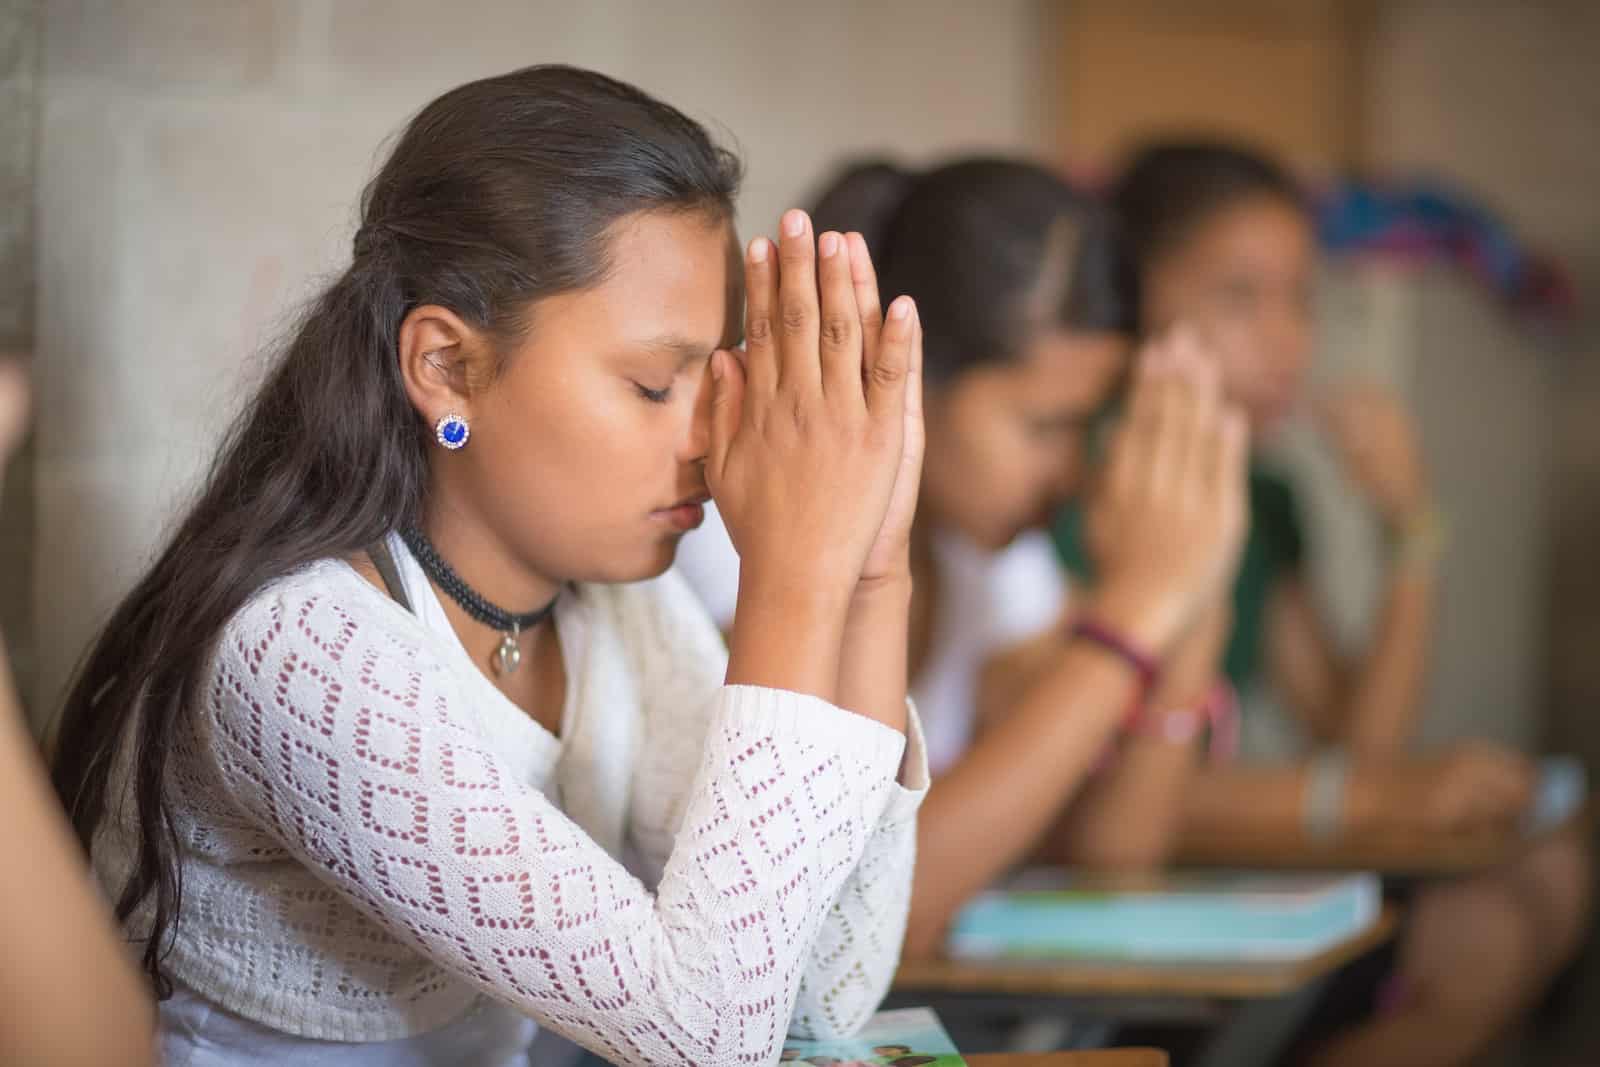 Brokenness Before God - a teenage girl sits at a desk, praying, with her hands held up to her face.